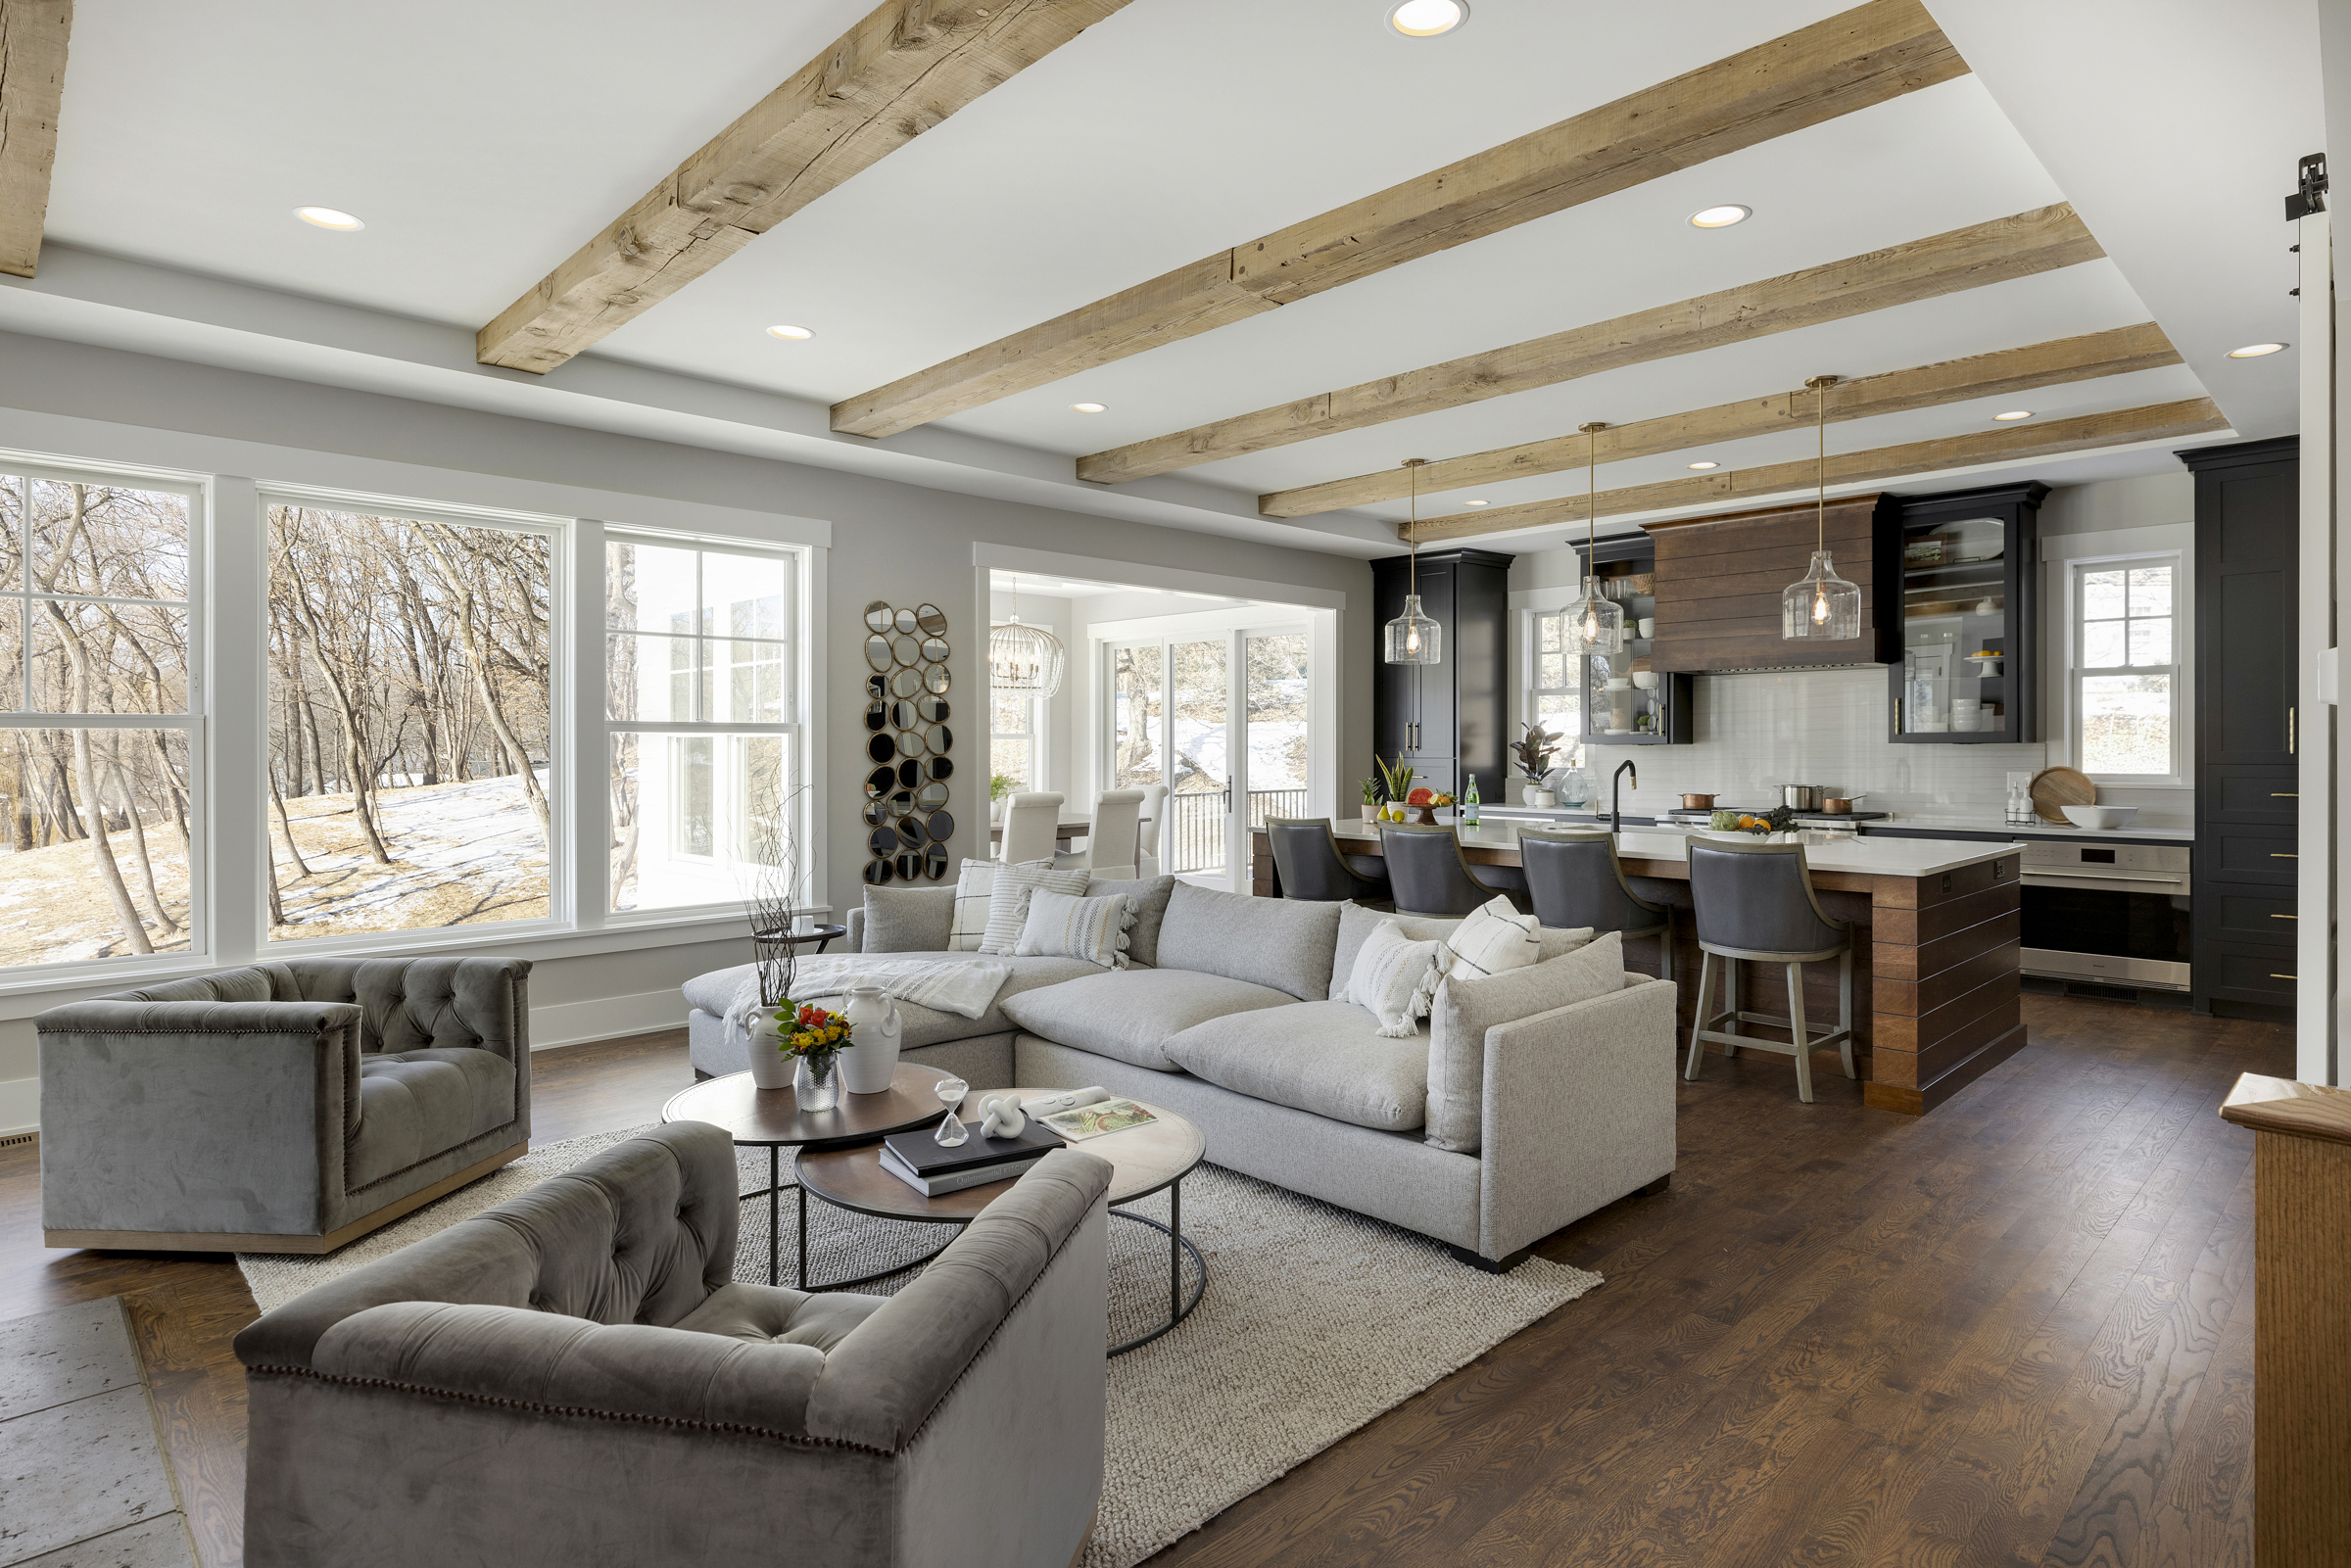 A living room with wood beams and gray furniture.